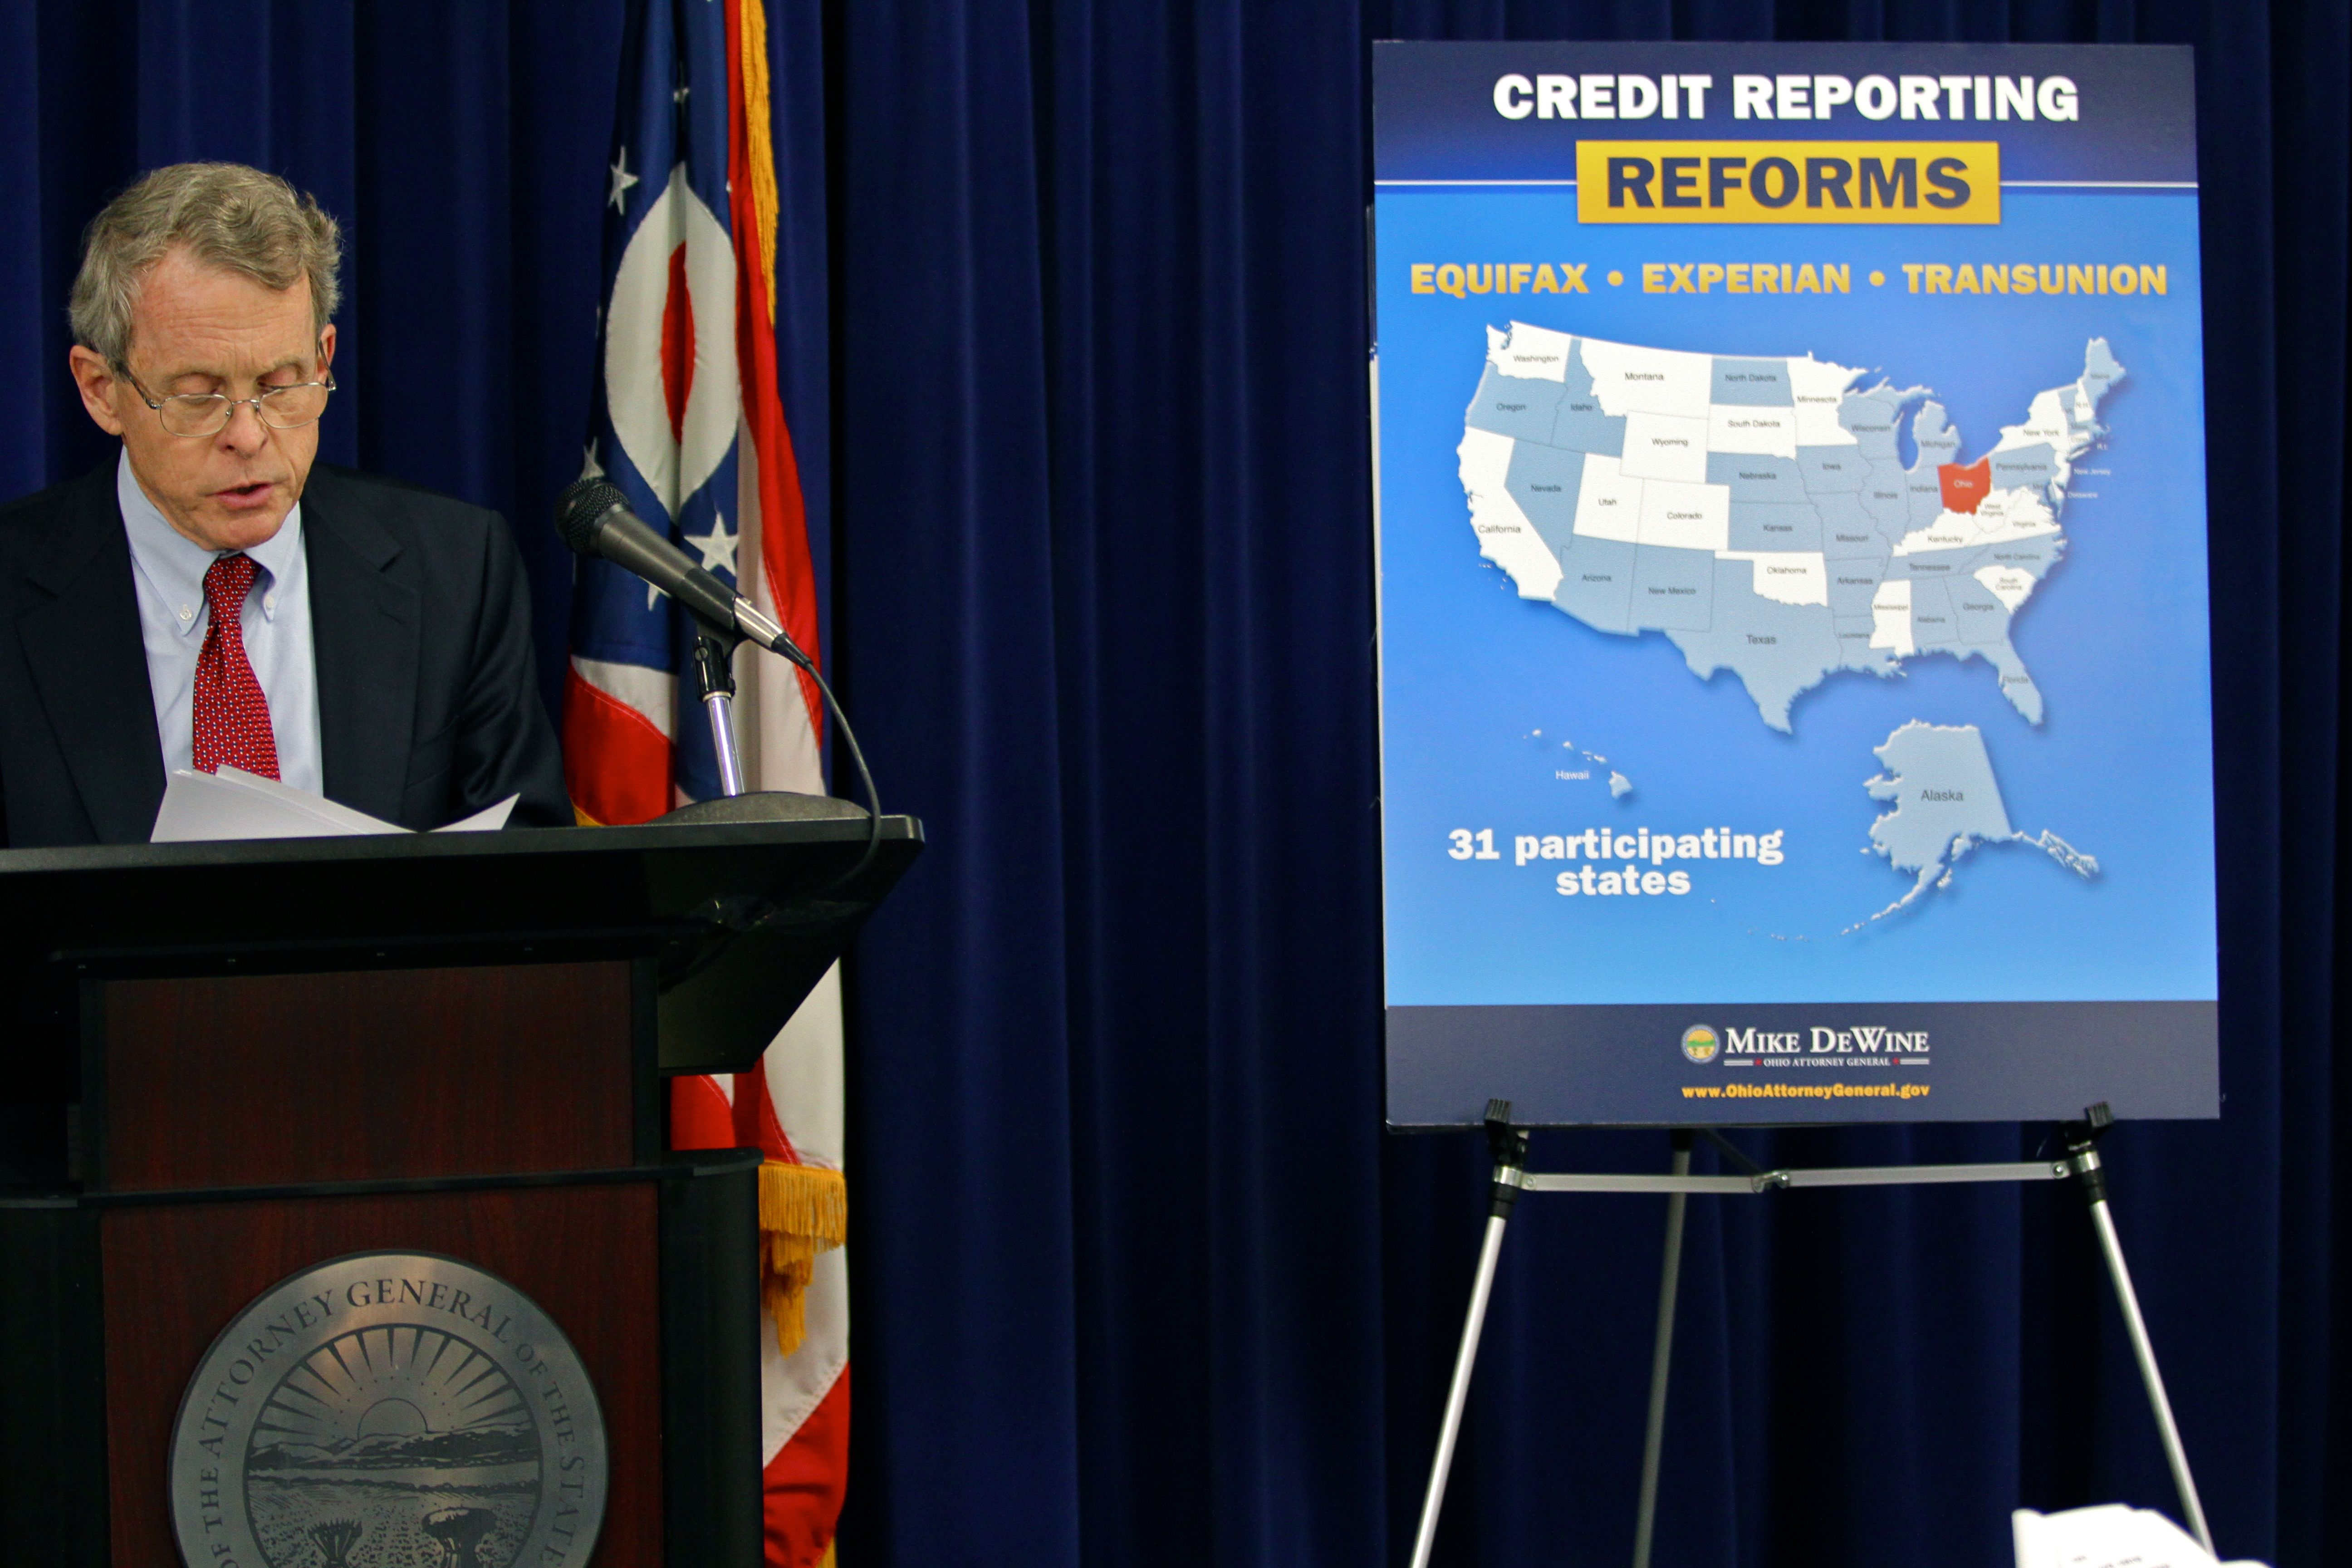 DeWine Announces Major National Settlement with Credit Reporting Agencies